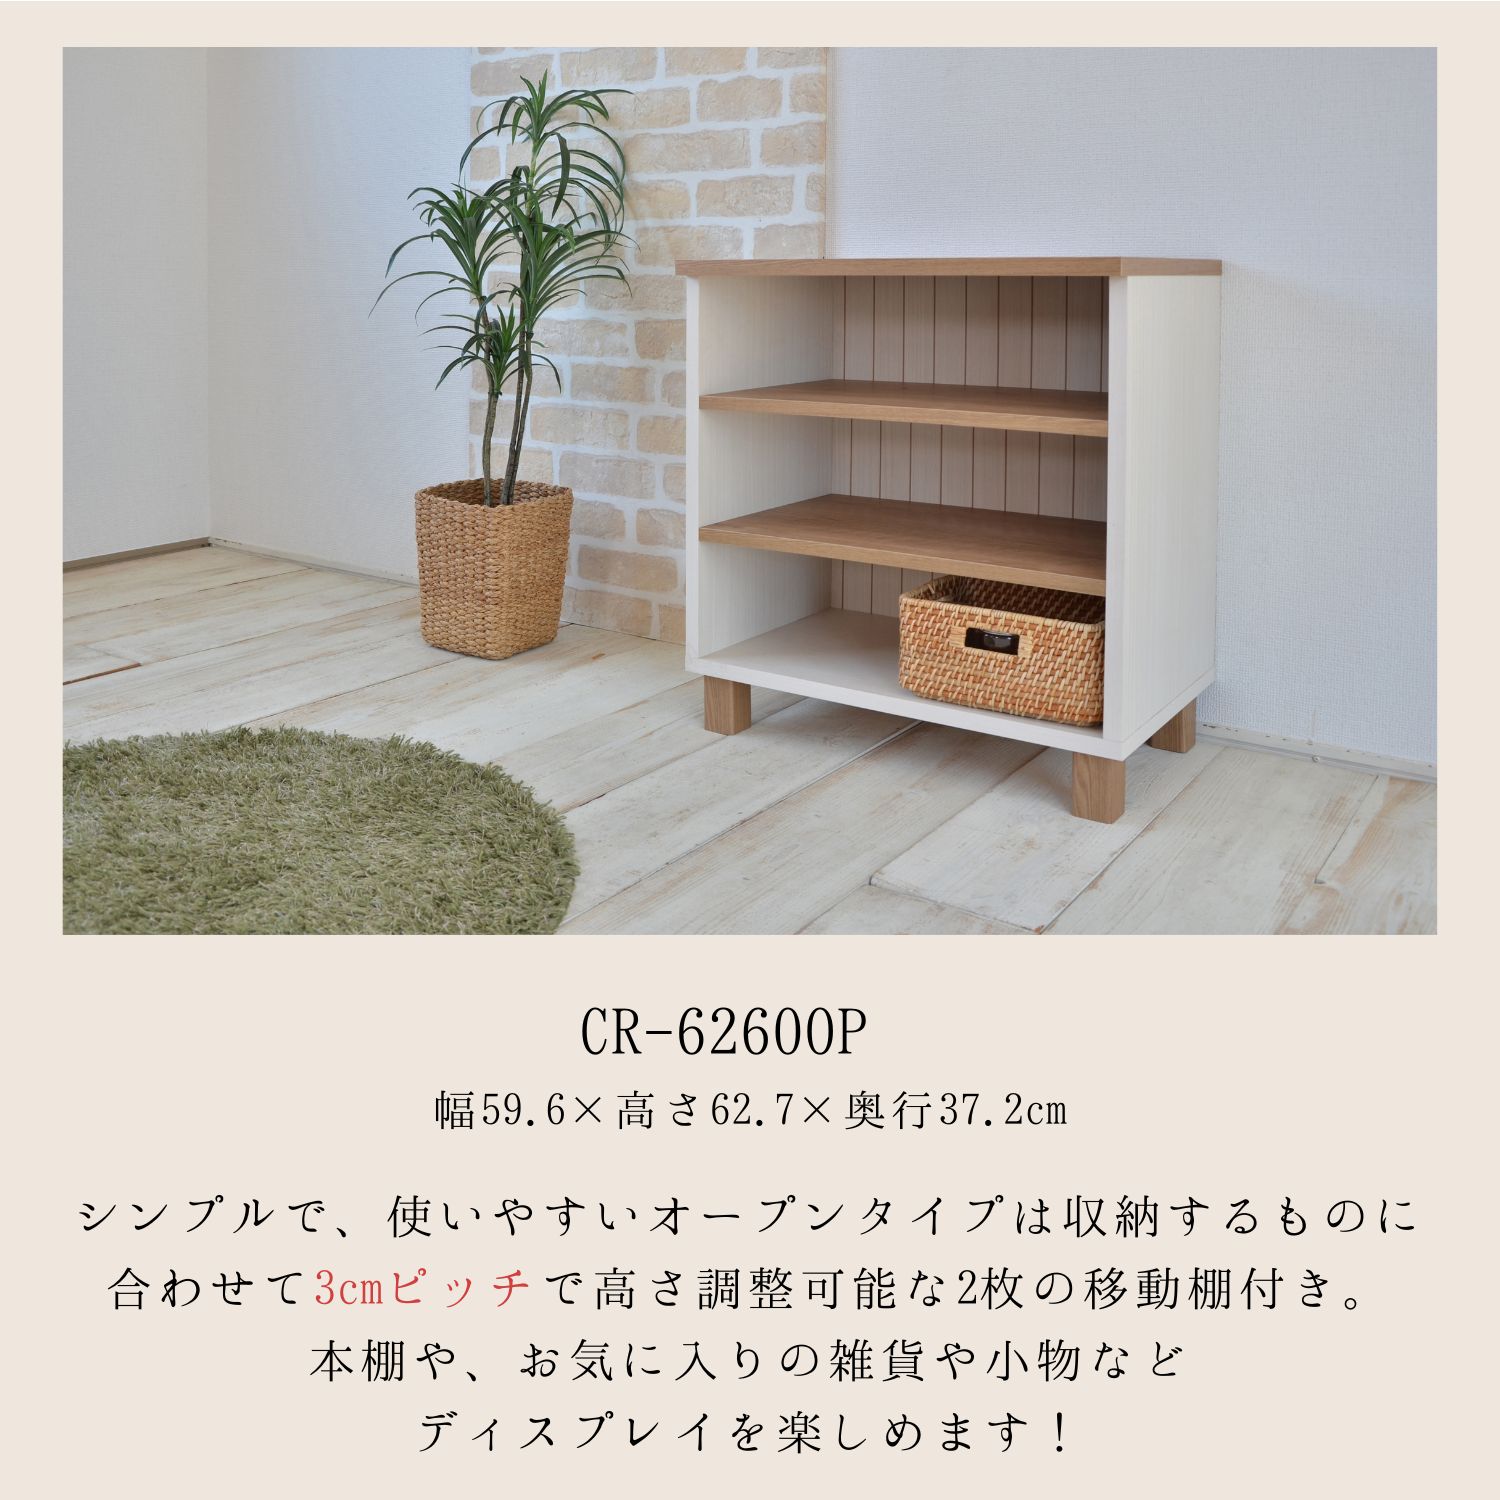  cabinet television stand chest French Country Carina compact width approximately 60cm stylish wooden made in Japan CR-6260 new life 